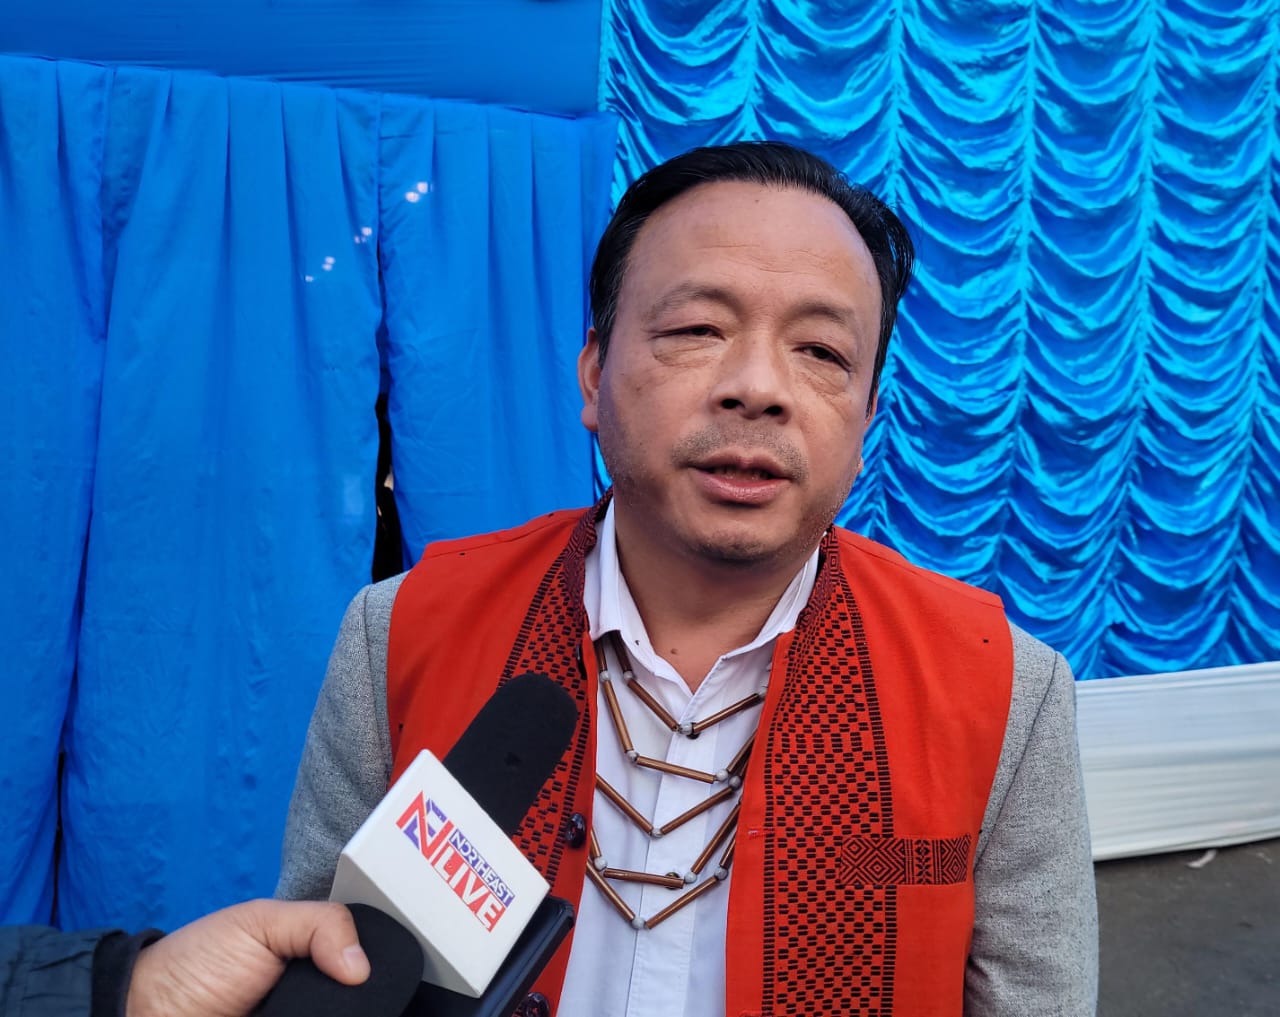 Meghalaya to seek Centre’s support in various Community based development activities organised in the state: Paul